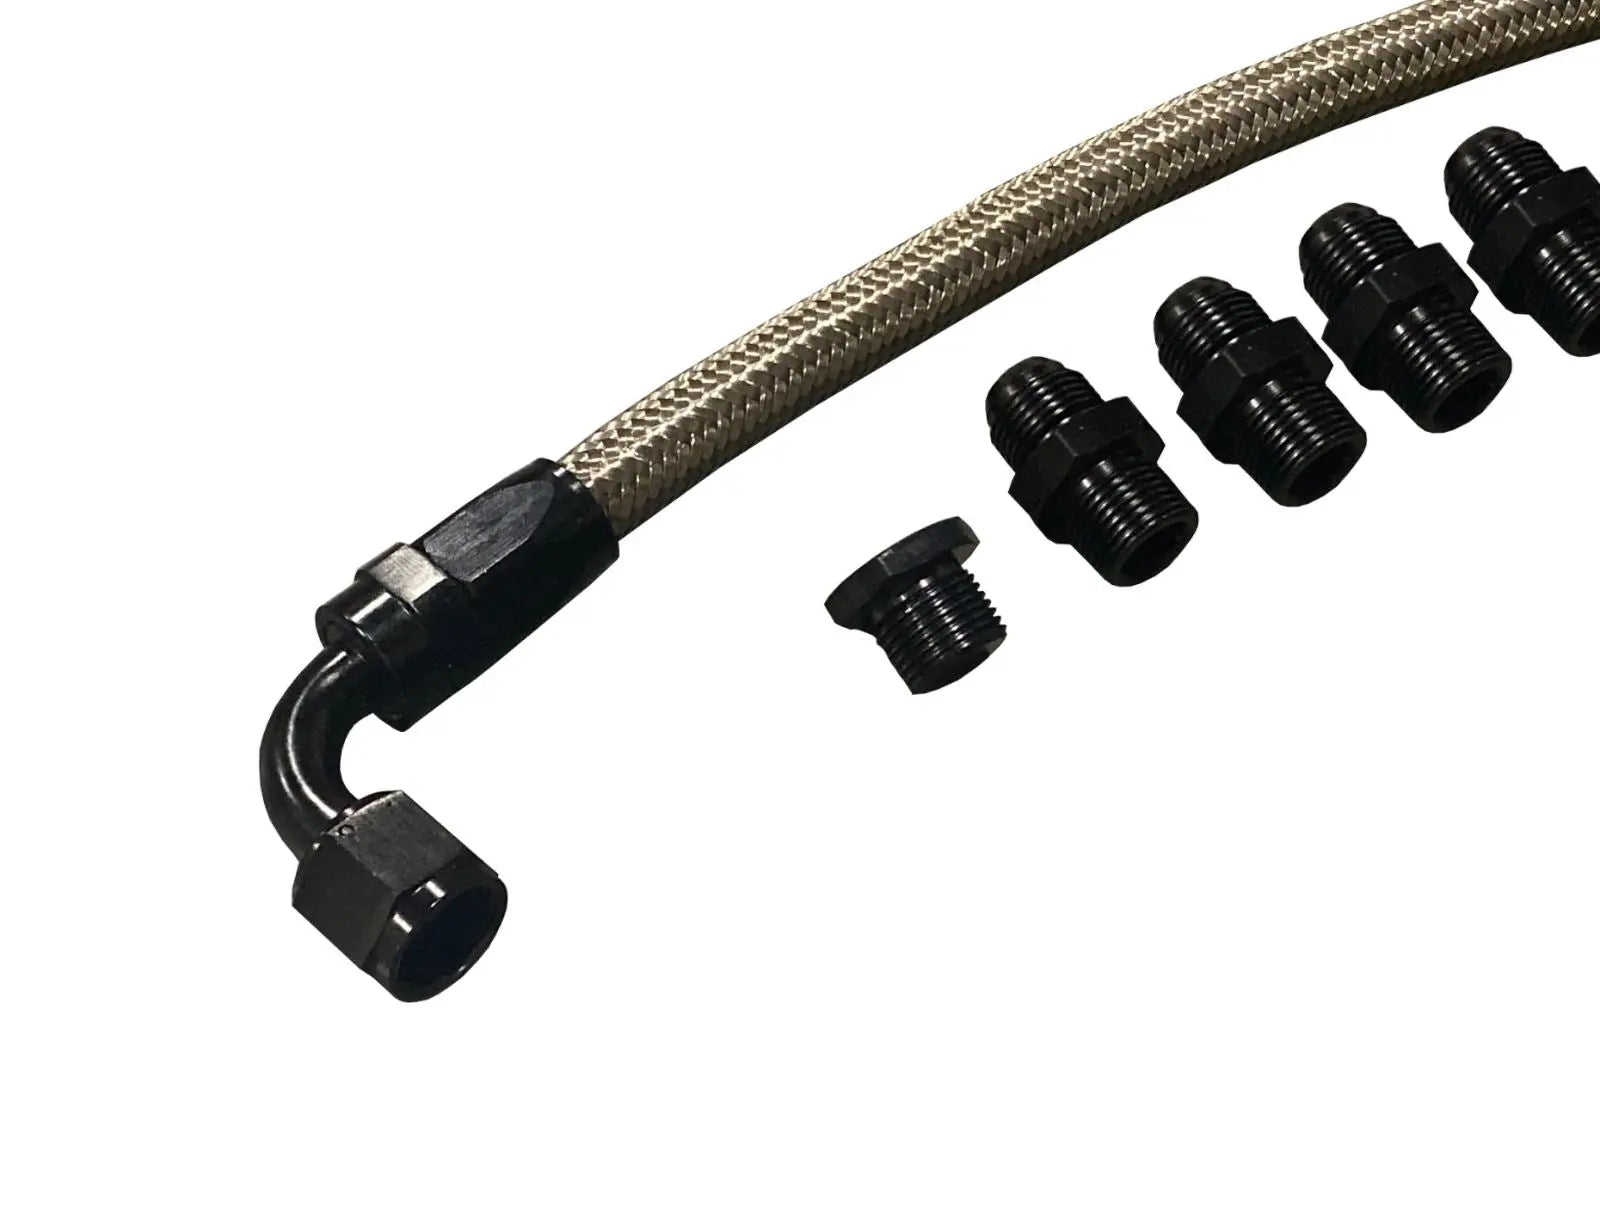 LS Crossover Fuel Line Kit LS1 LSX V8 Adapter Fittings 6AN